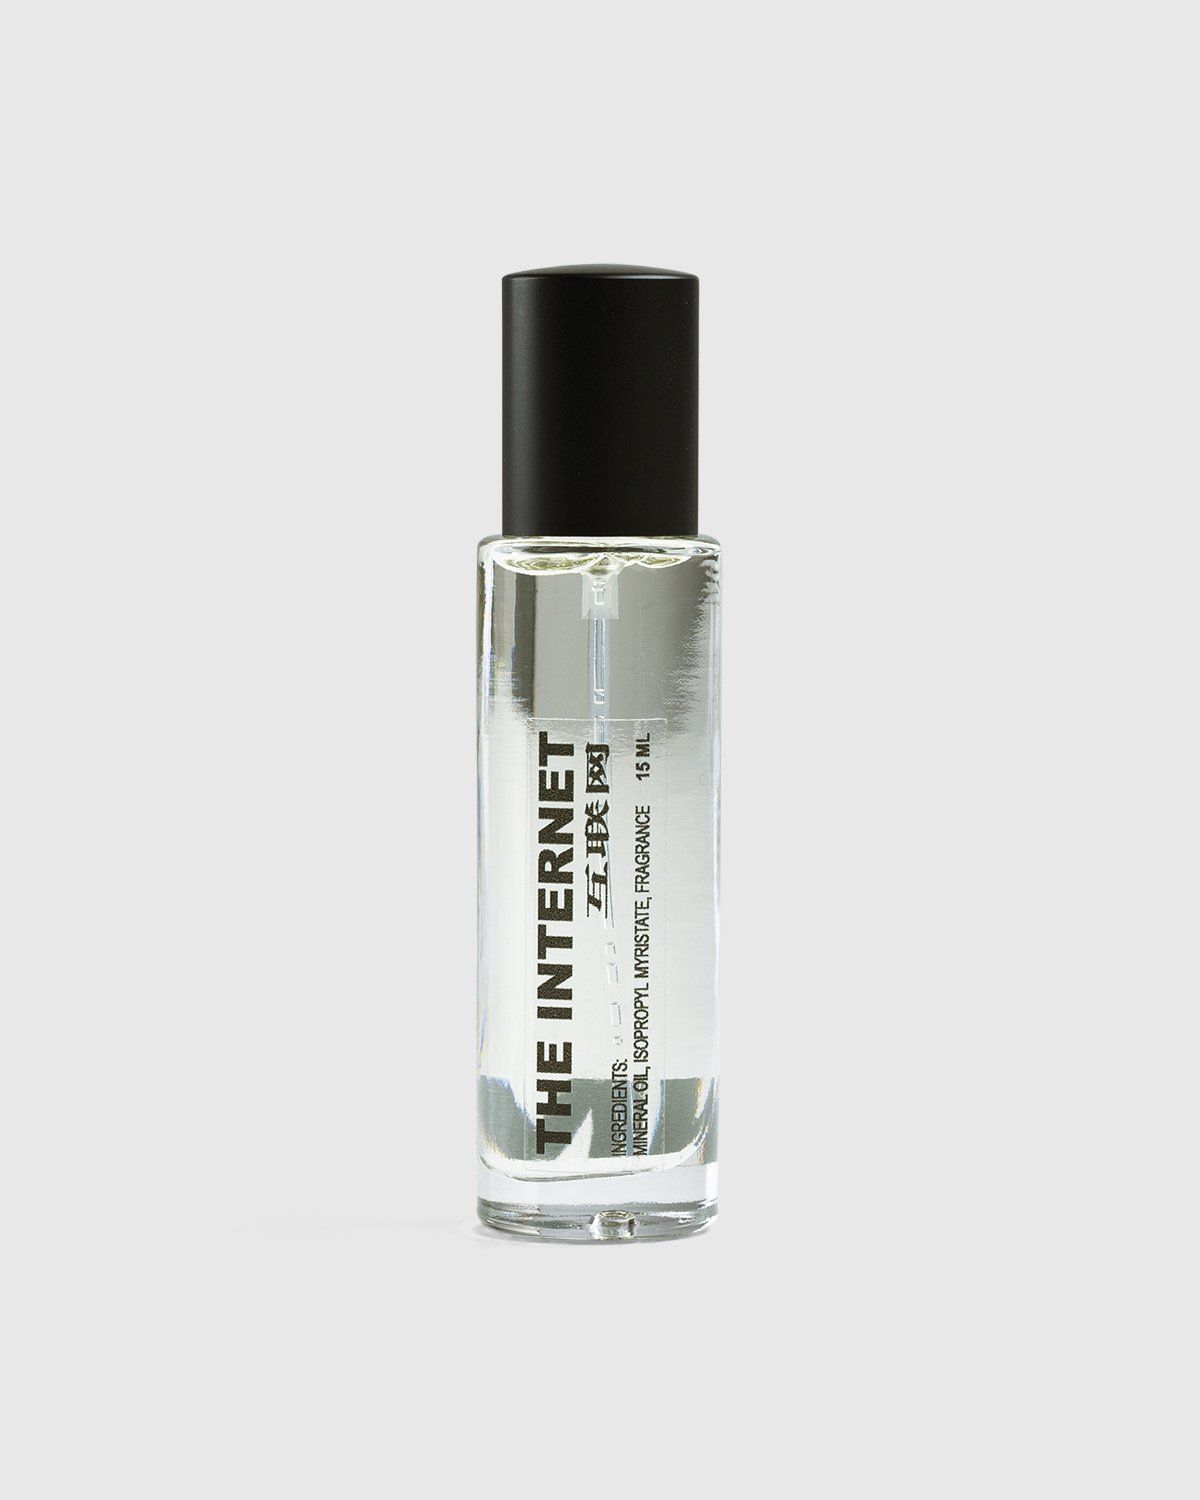 New Models x The Society of Scent x Highsnobiety – Scent of The Internet - Cosmetics - Image 1